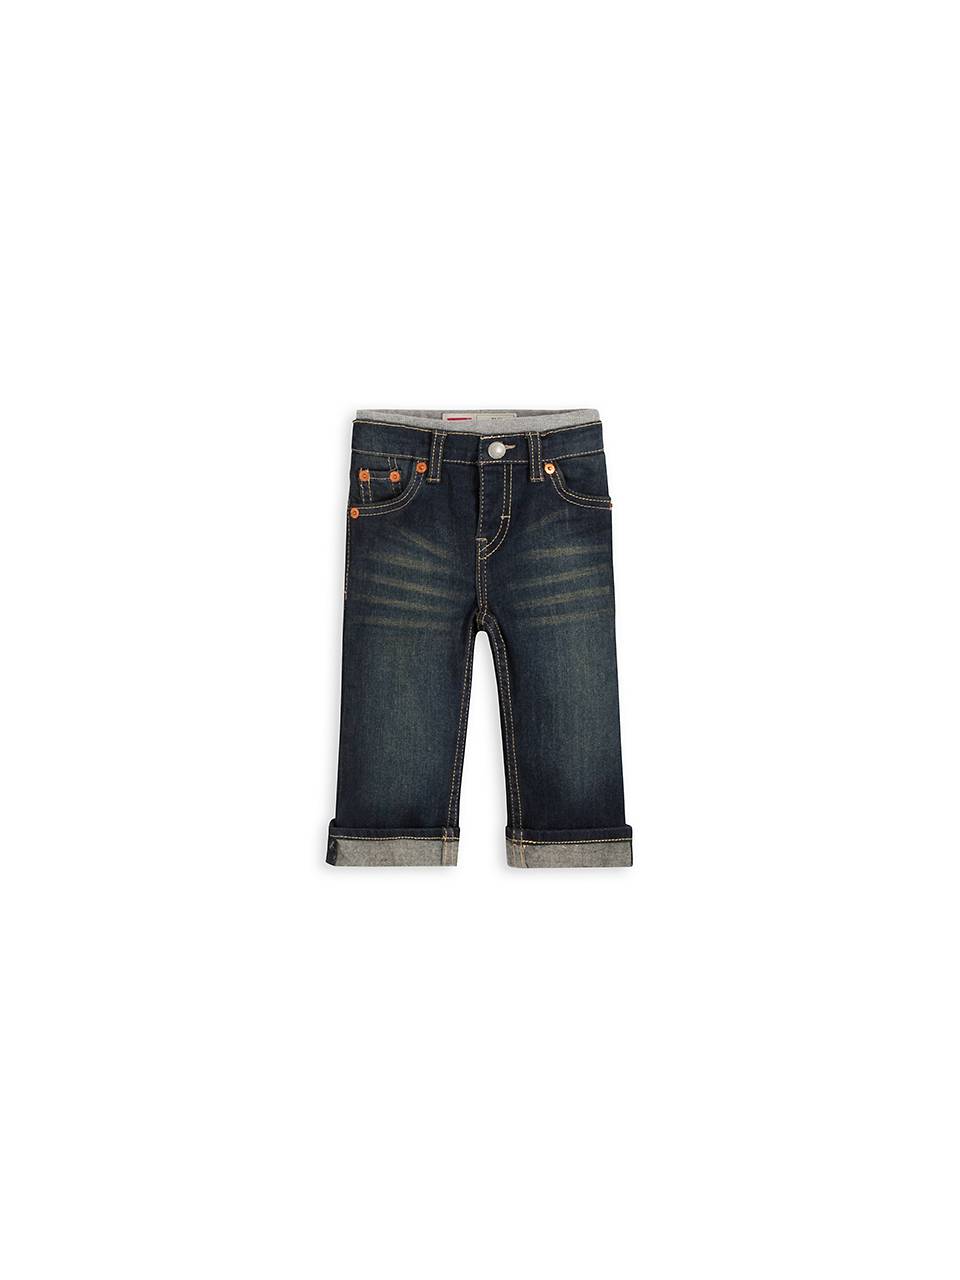 Baby Boy Clothing Shop Jeans, Shirts, Onesies & | Levi's® US